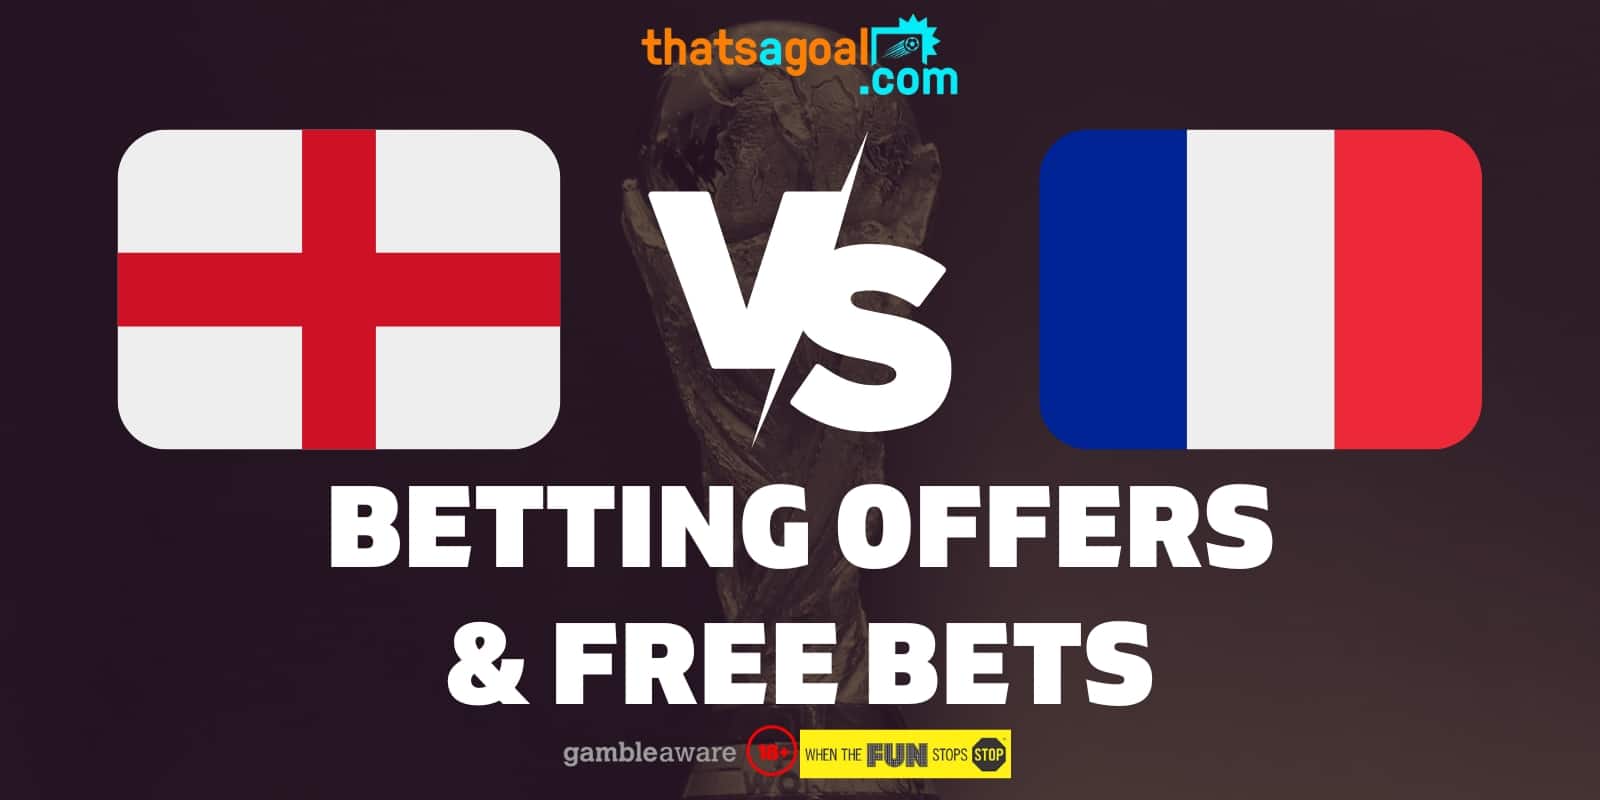 England vs France betting offers